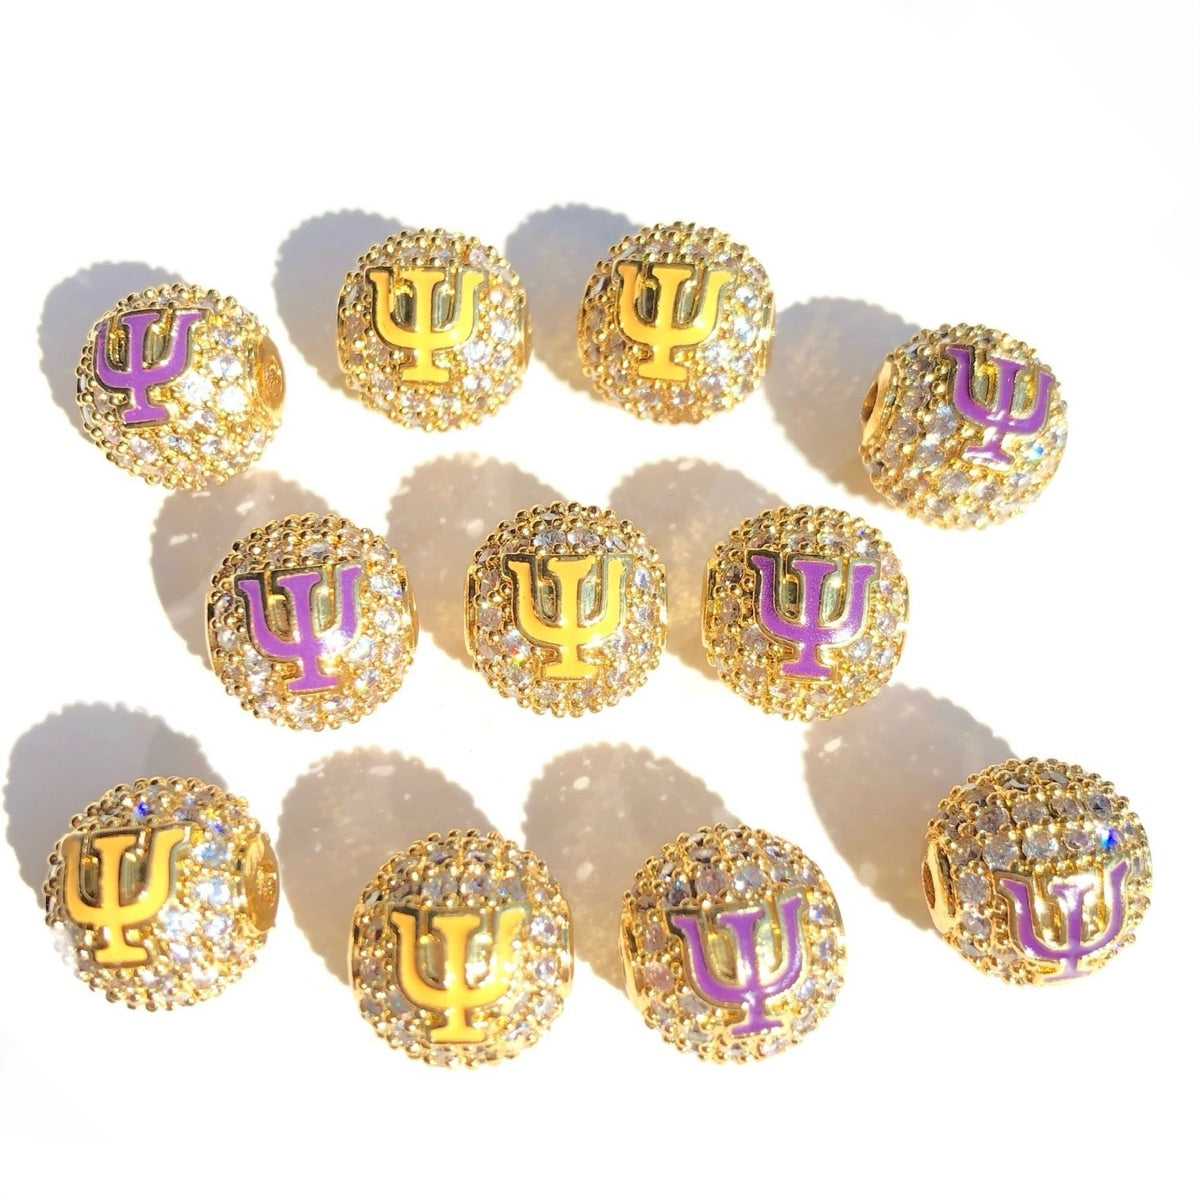 12pcs/lot 10mm Purple Yellow Enamel CZ Paved Greek Letter "Ψ", "Φ", "Ω" Ball Spacers Beads 12 Gold Ψ CZ Paved Spacers 10mm Beads Ball Beads Greek Letters New Spacers Arrivals Charms Beads Beyond